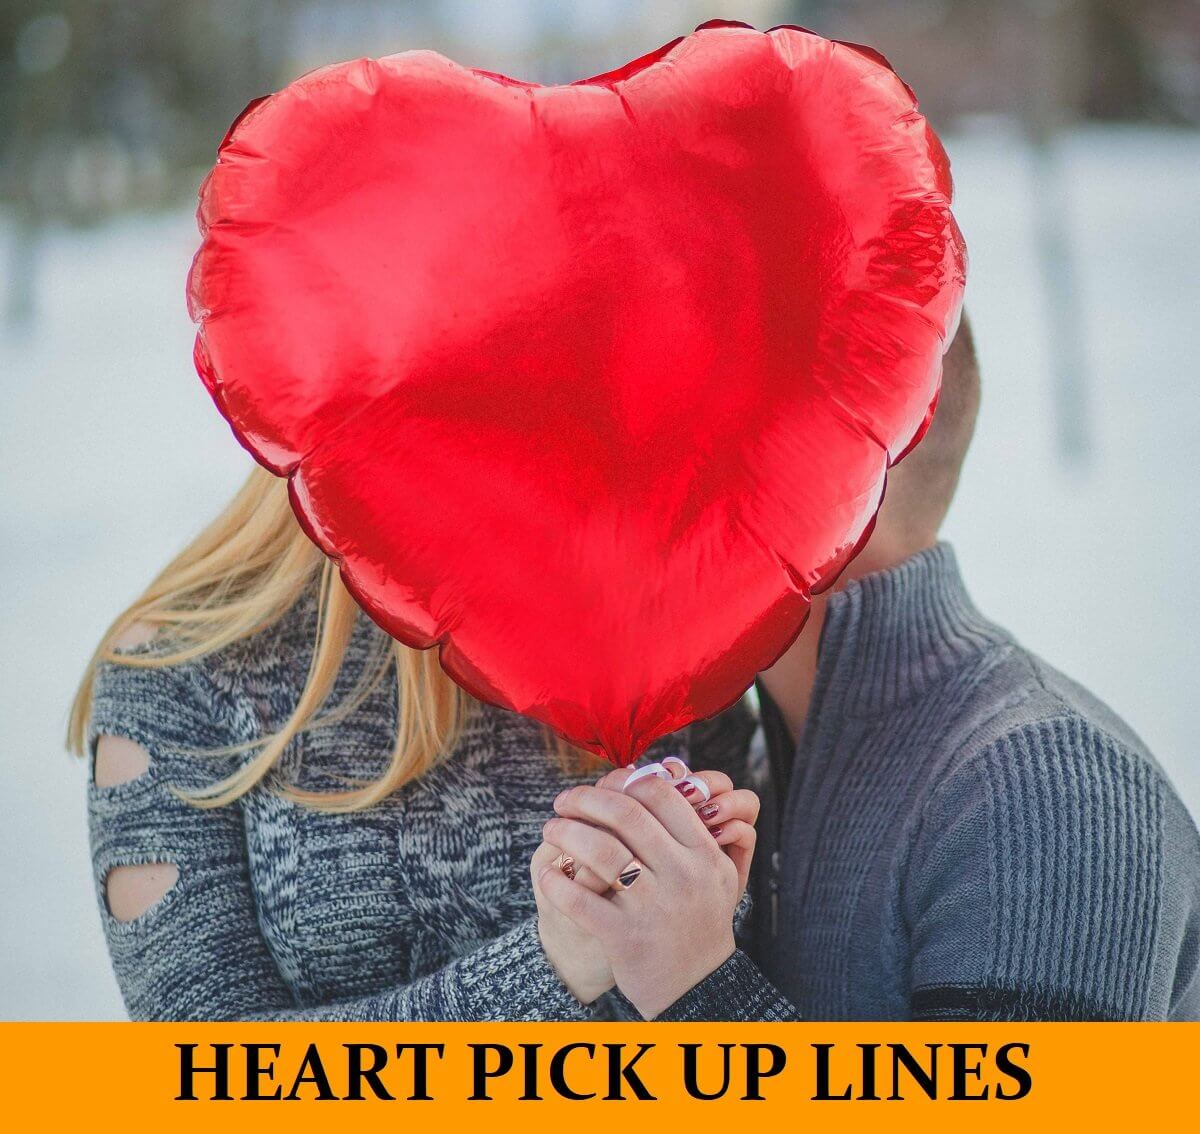 Pick Up Lines About Heart